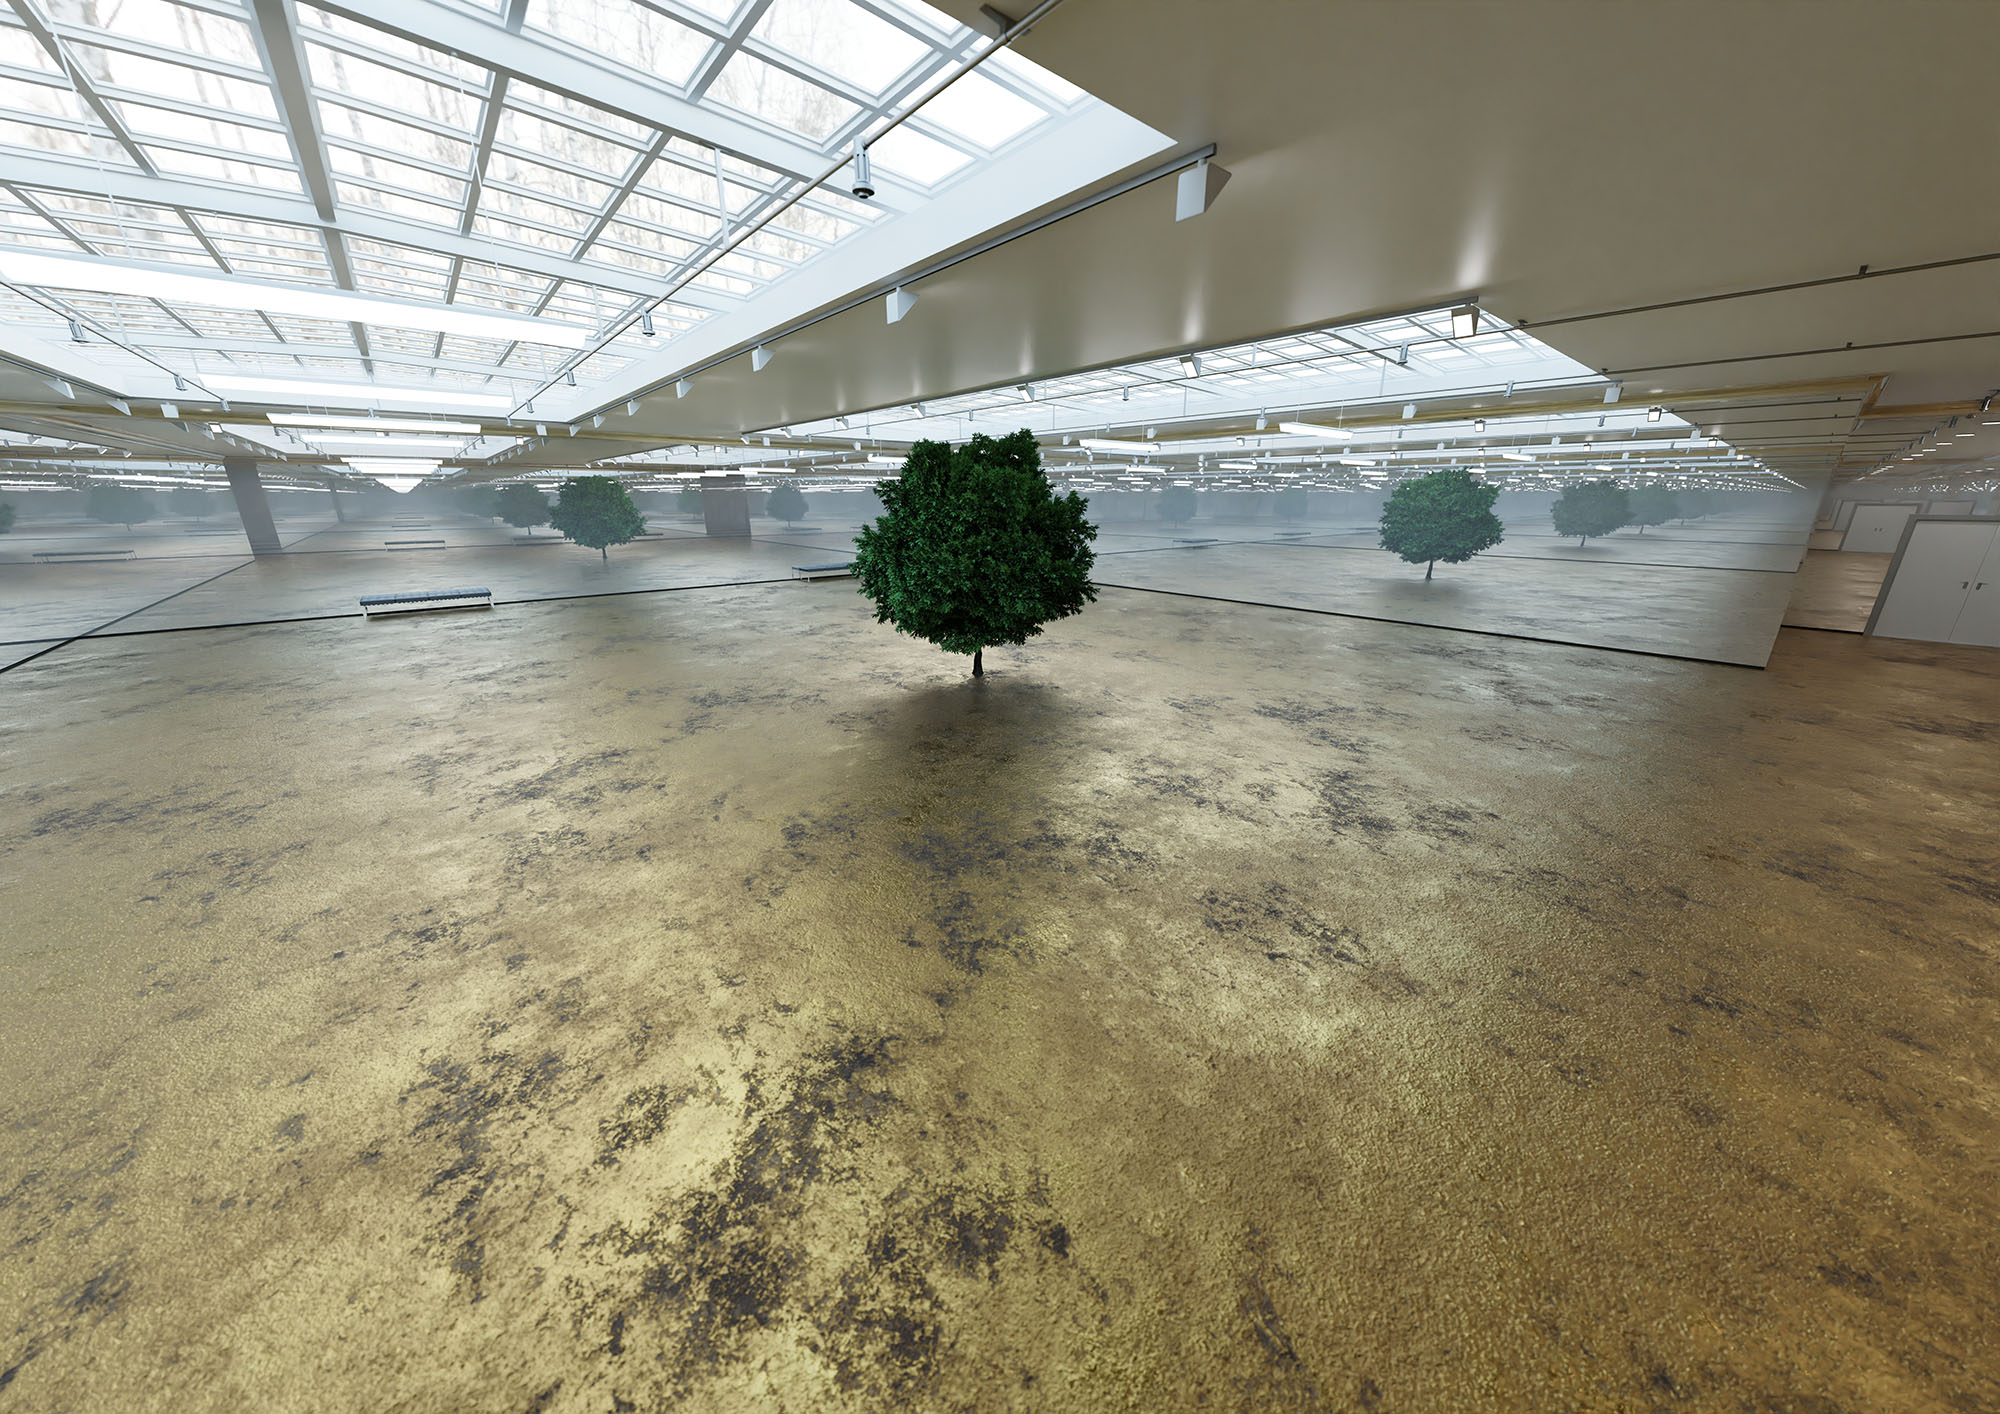 Paradise - The infinite forest - 2023 - Unsculpted project
Variable size. Tree, golden floor, mirrored wall.